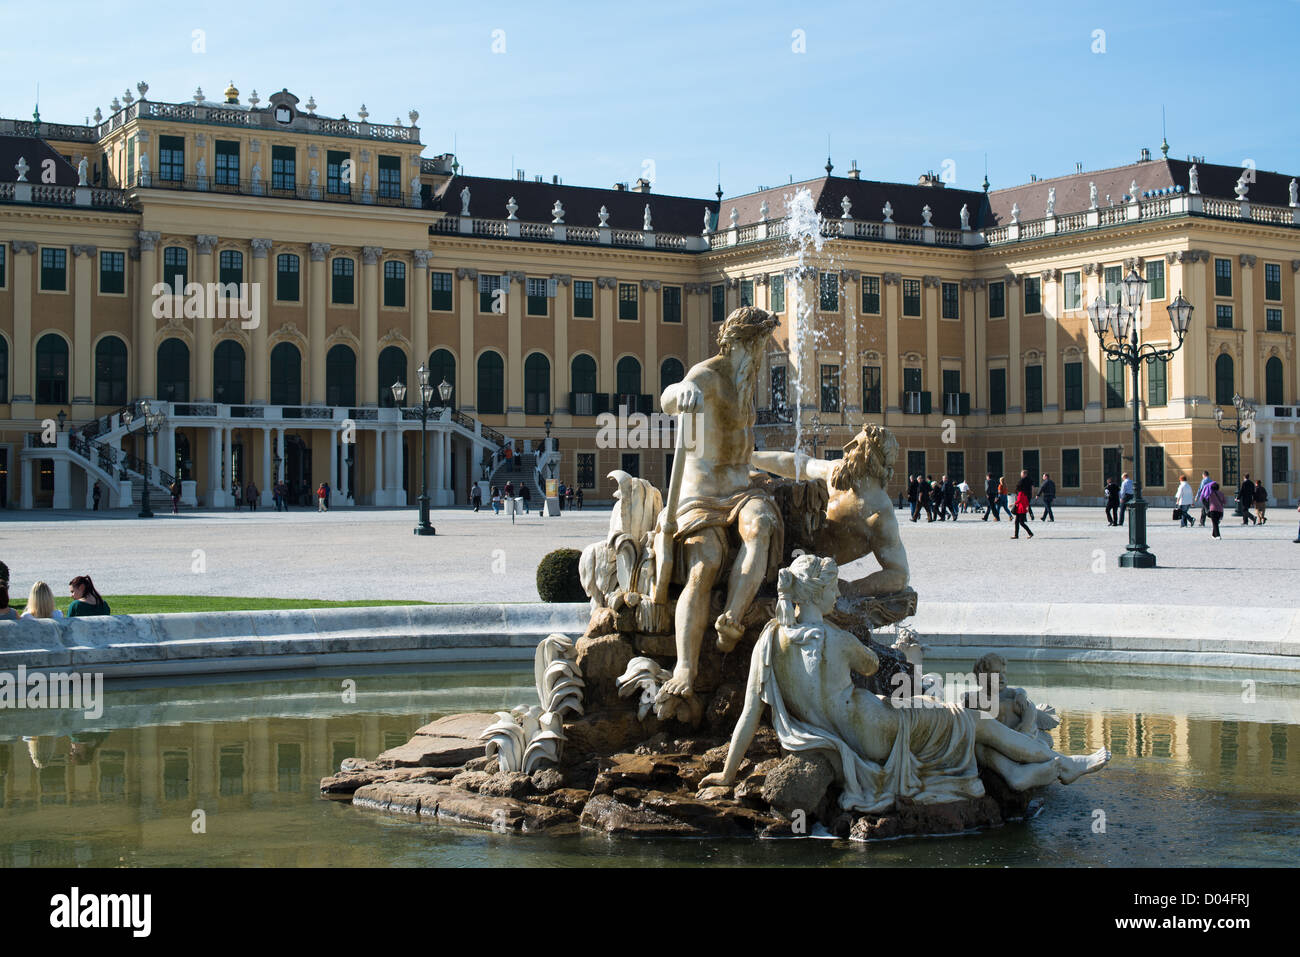 Visitors approaching the Schoenbrunn Palace, a UNESCO World Heritage Site on October 4, 2012 in Vienna, Austria. Stock Photo